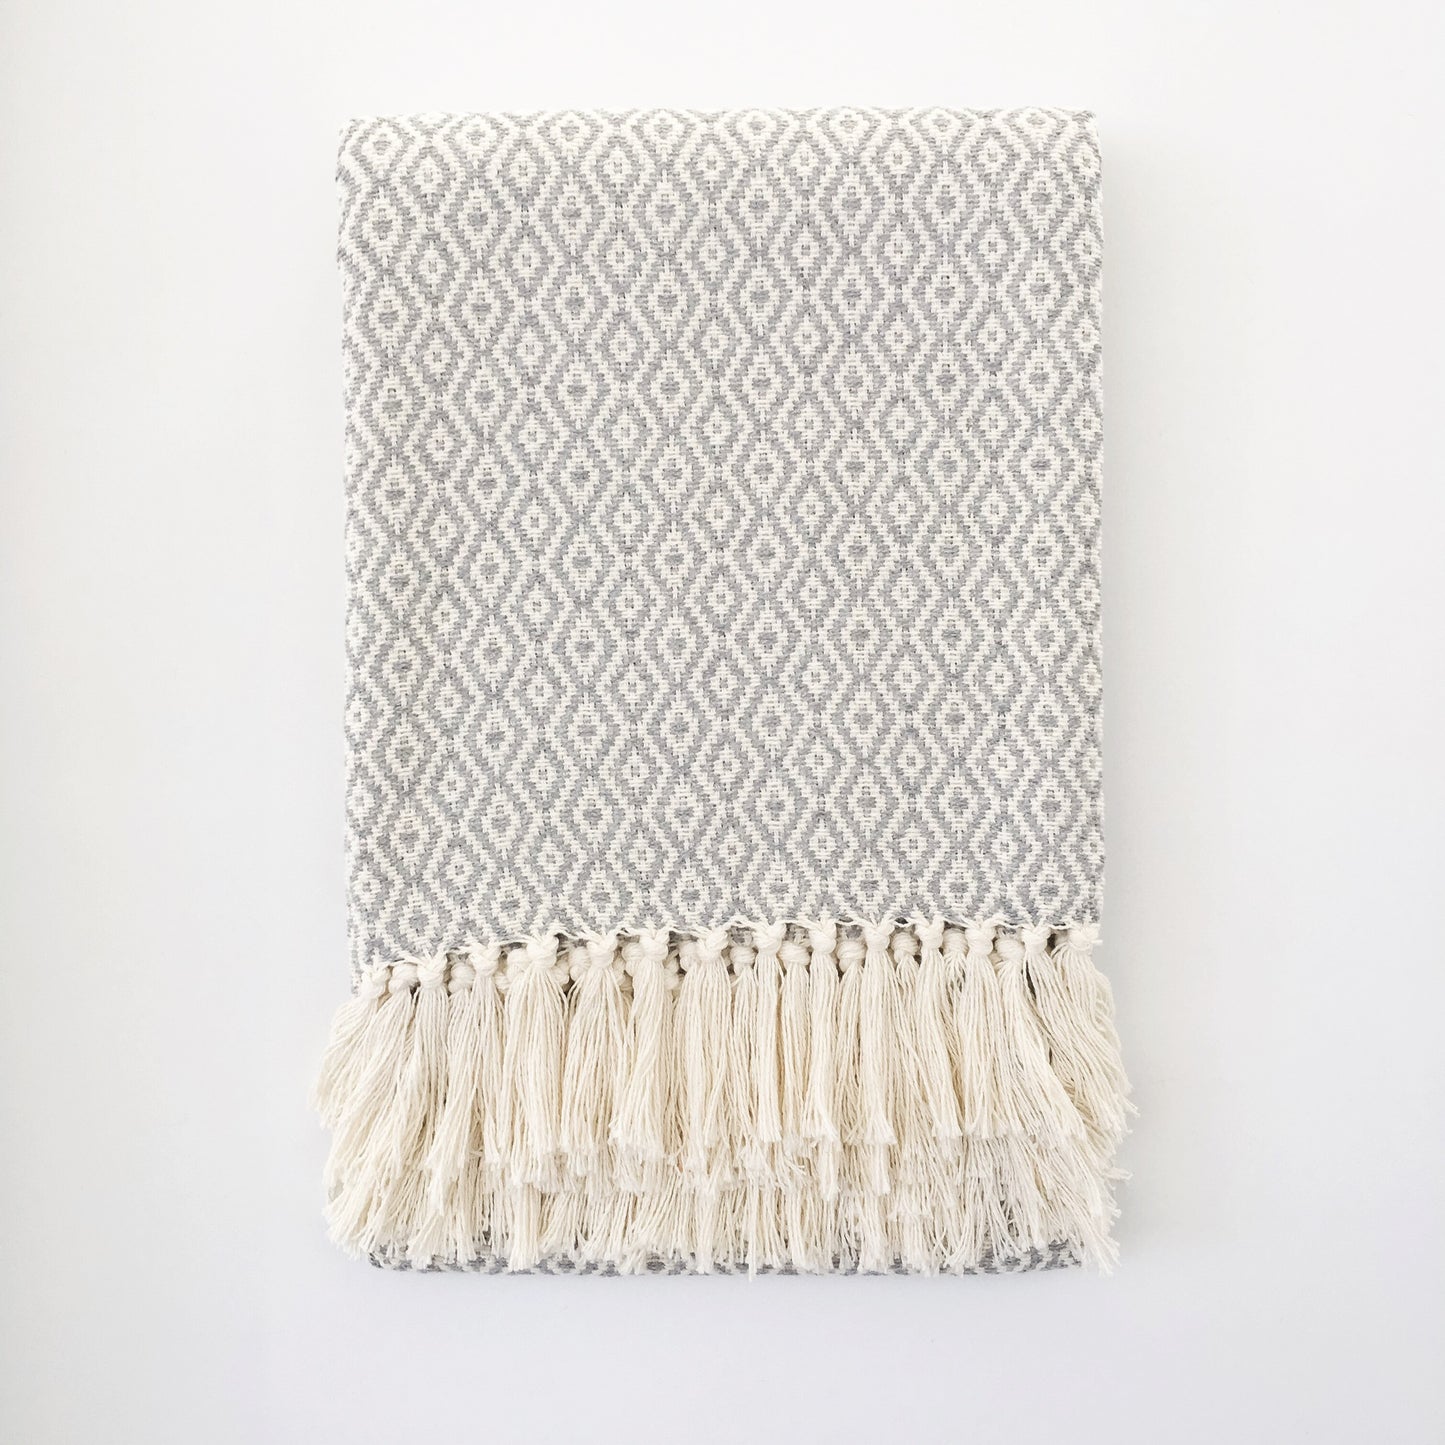 Handwoven recycled cotton throw geometric pattern grey and white fringe